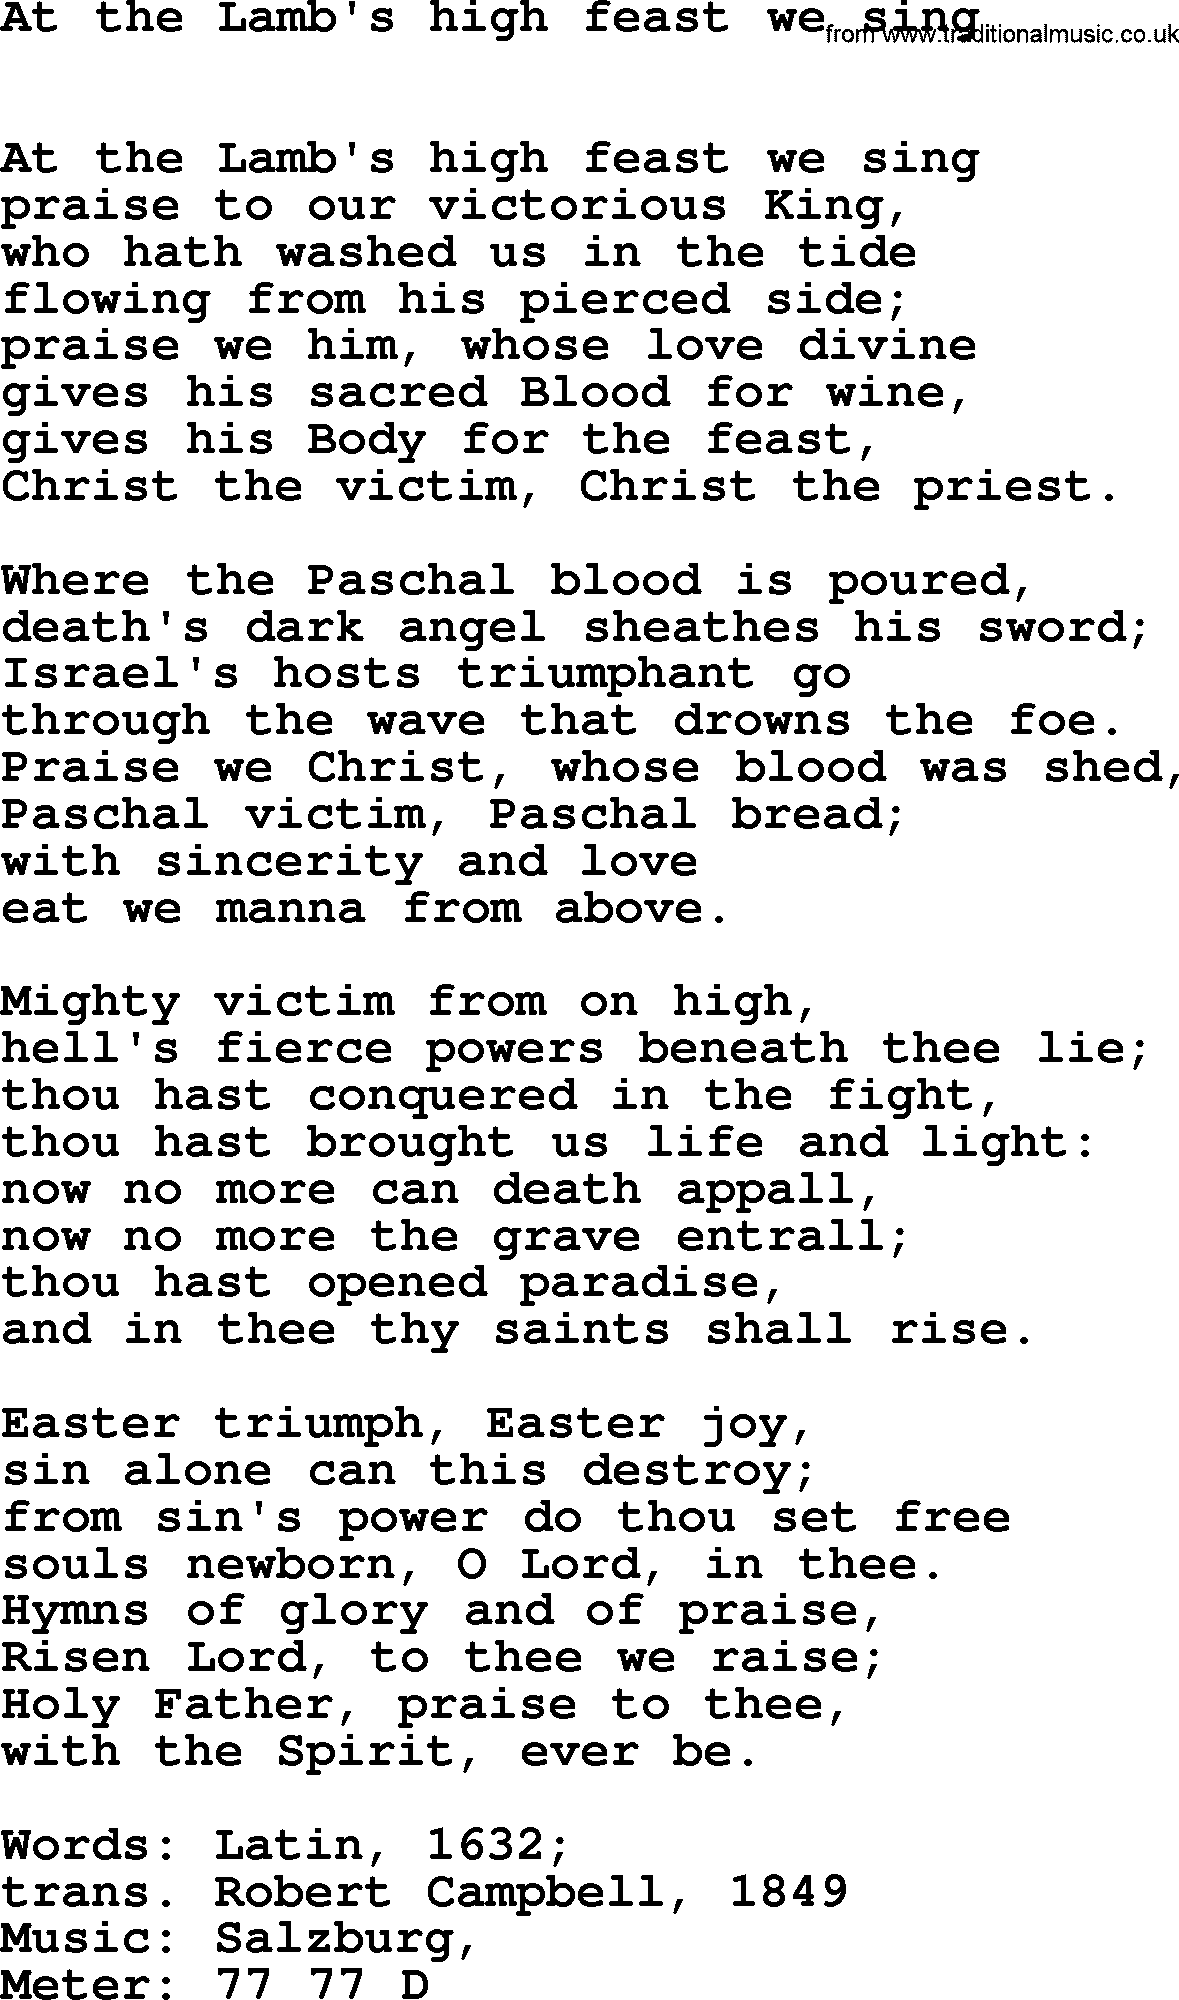 Book of Common Praise Hymn: At The Lamb's High Feast We Sing.txt lyrics with midi music